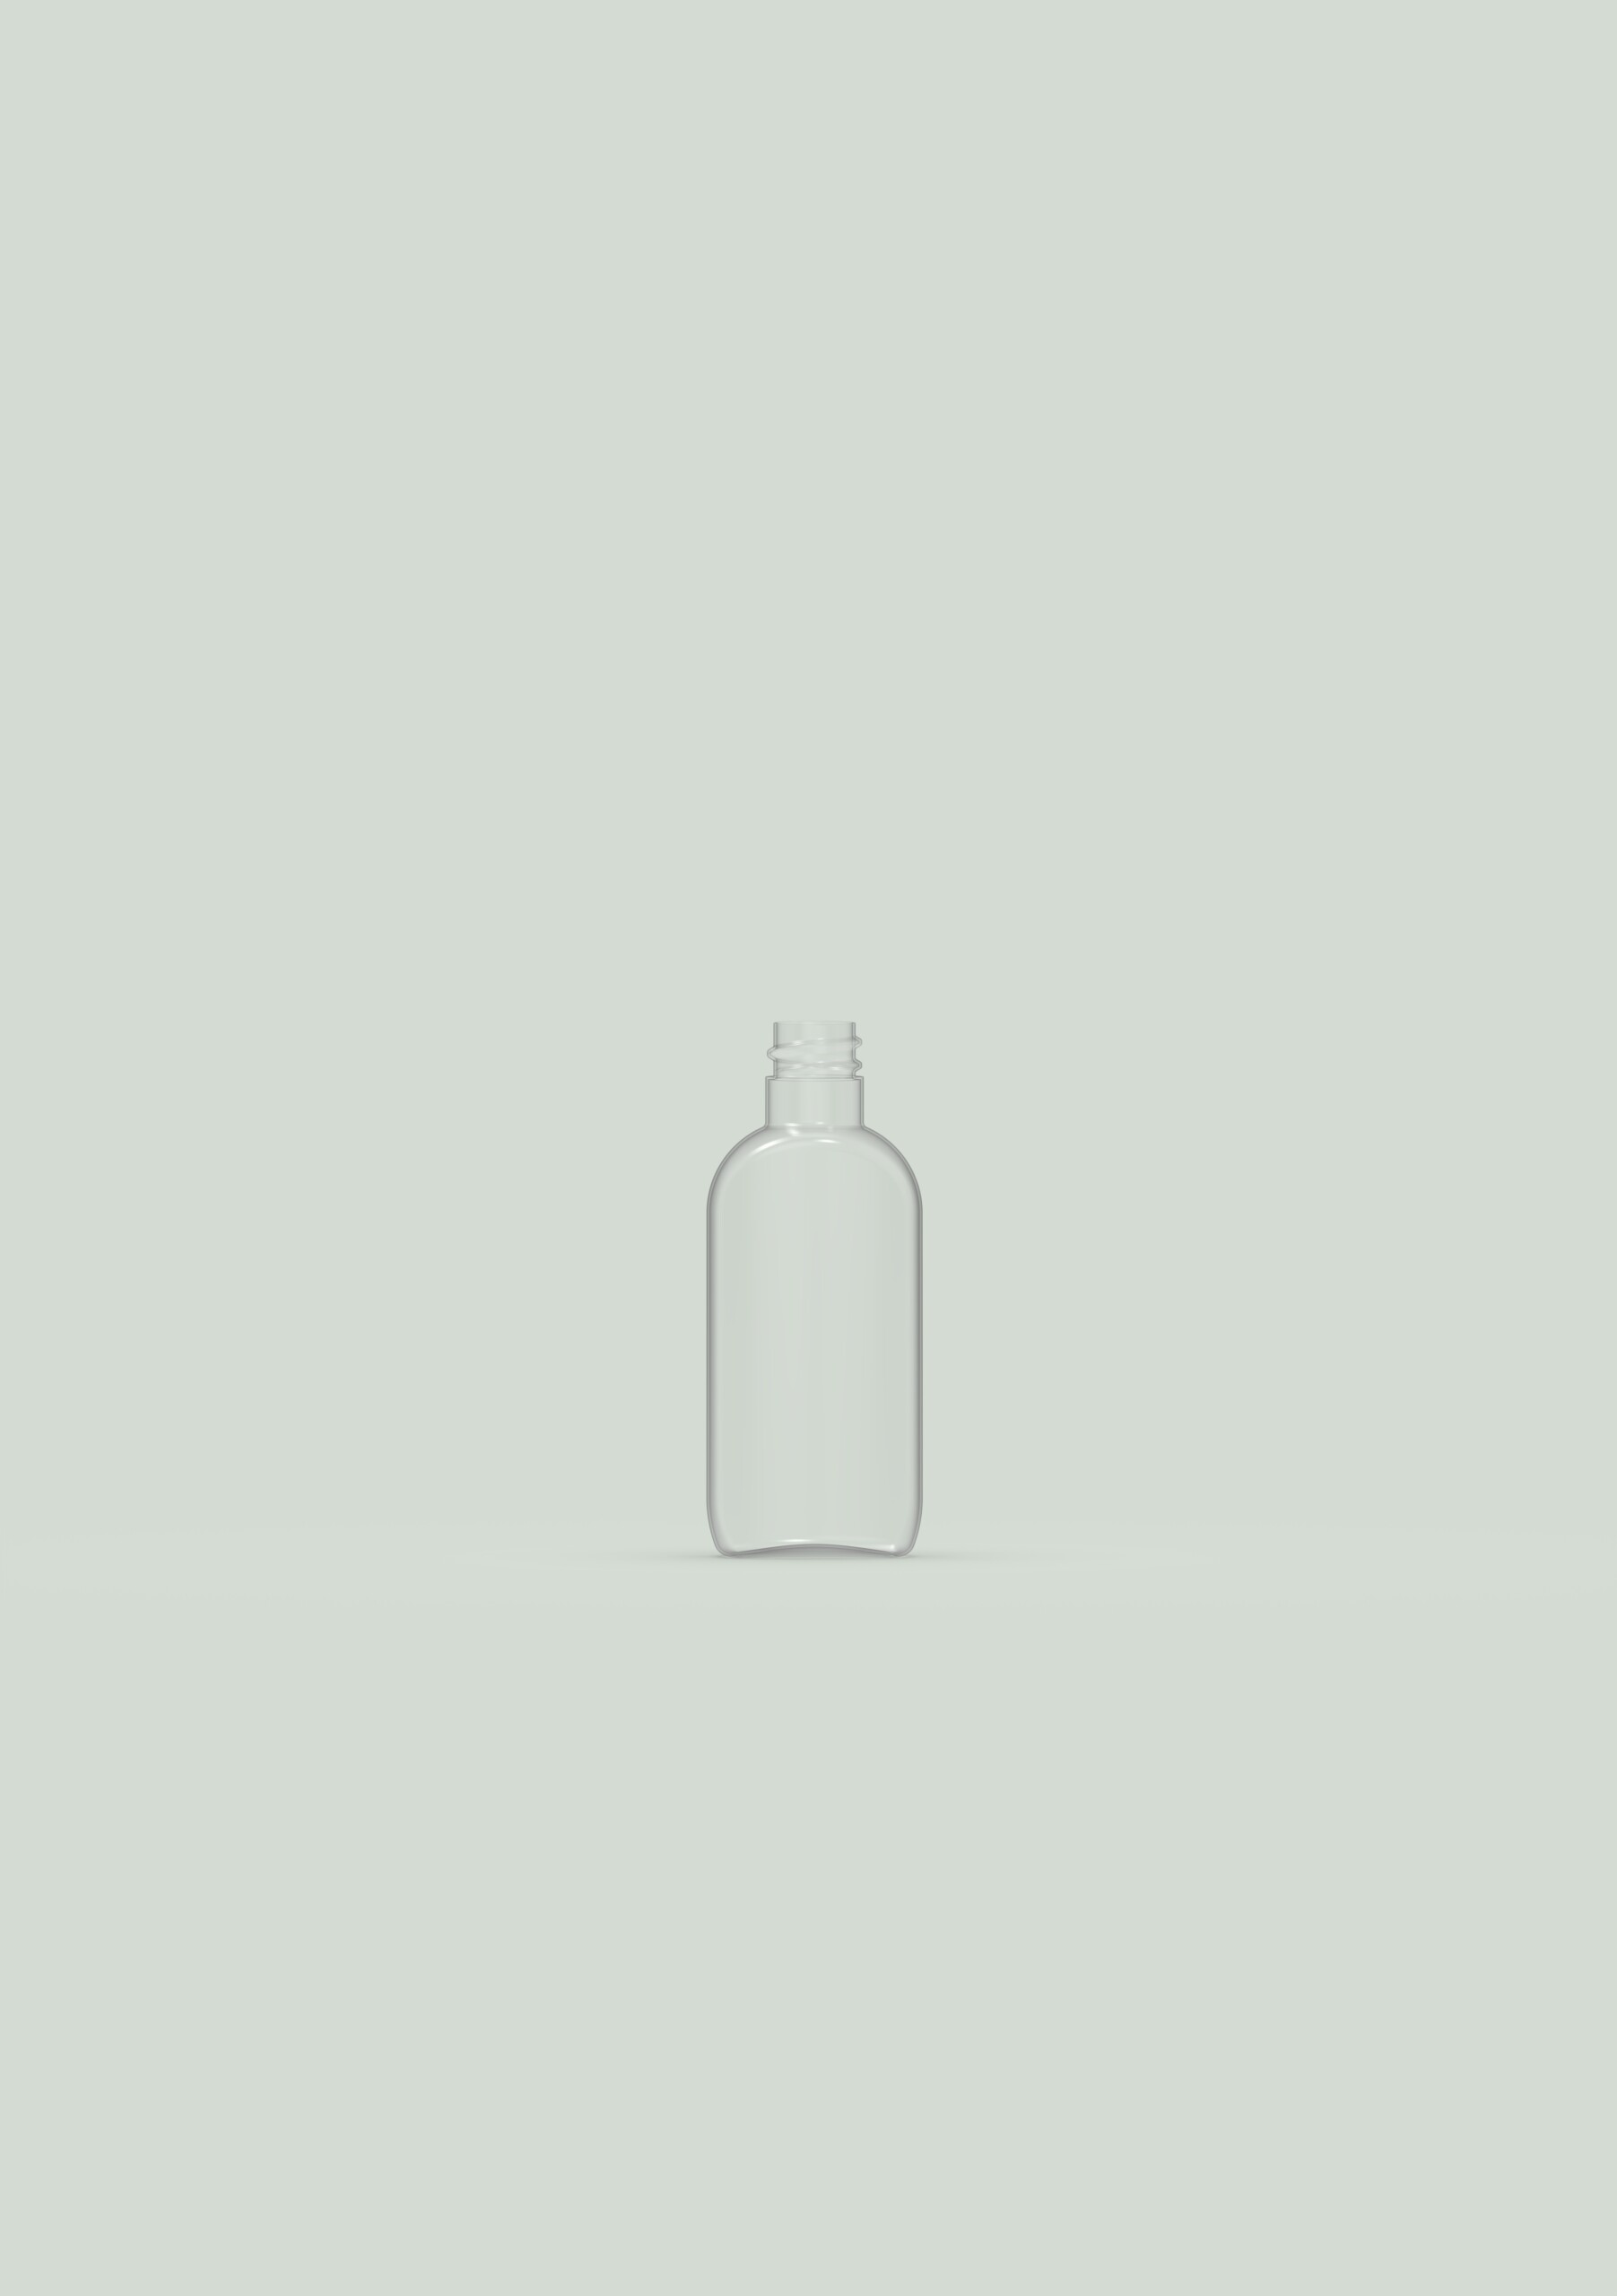 PET Oval bottle 50ml.958 scaled News